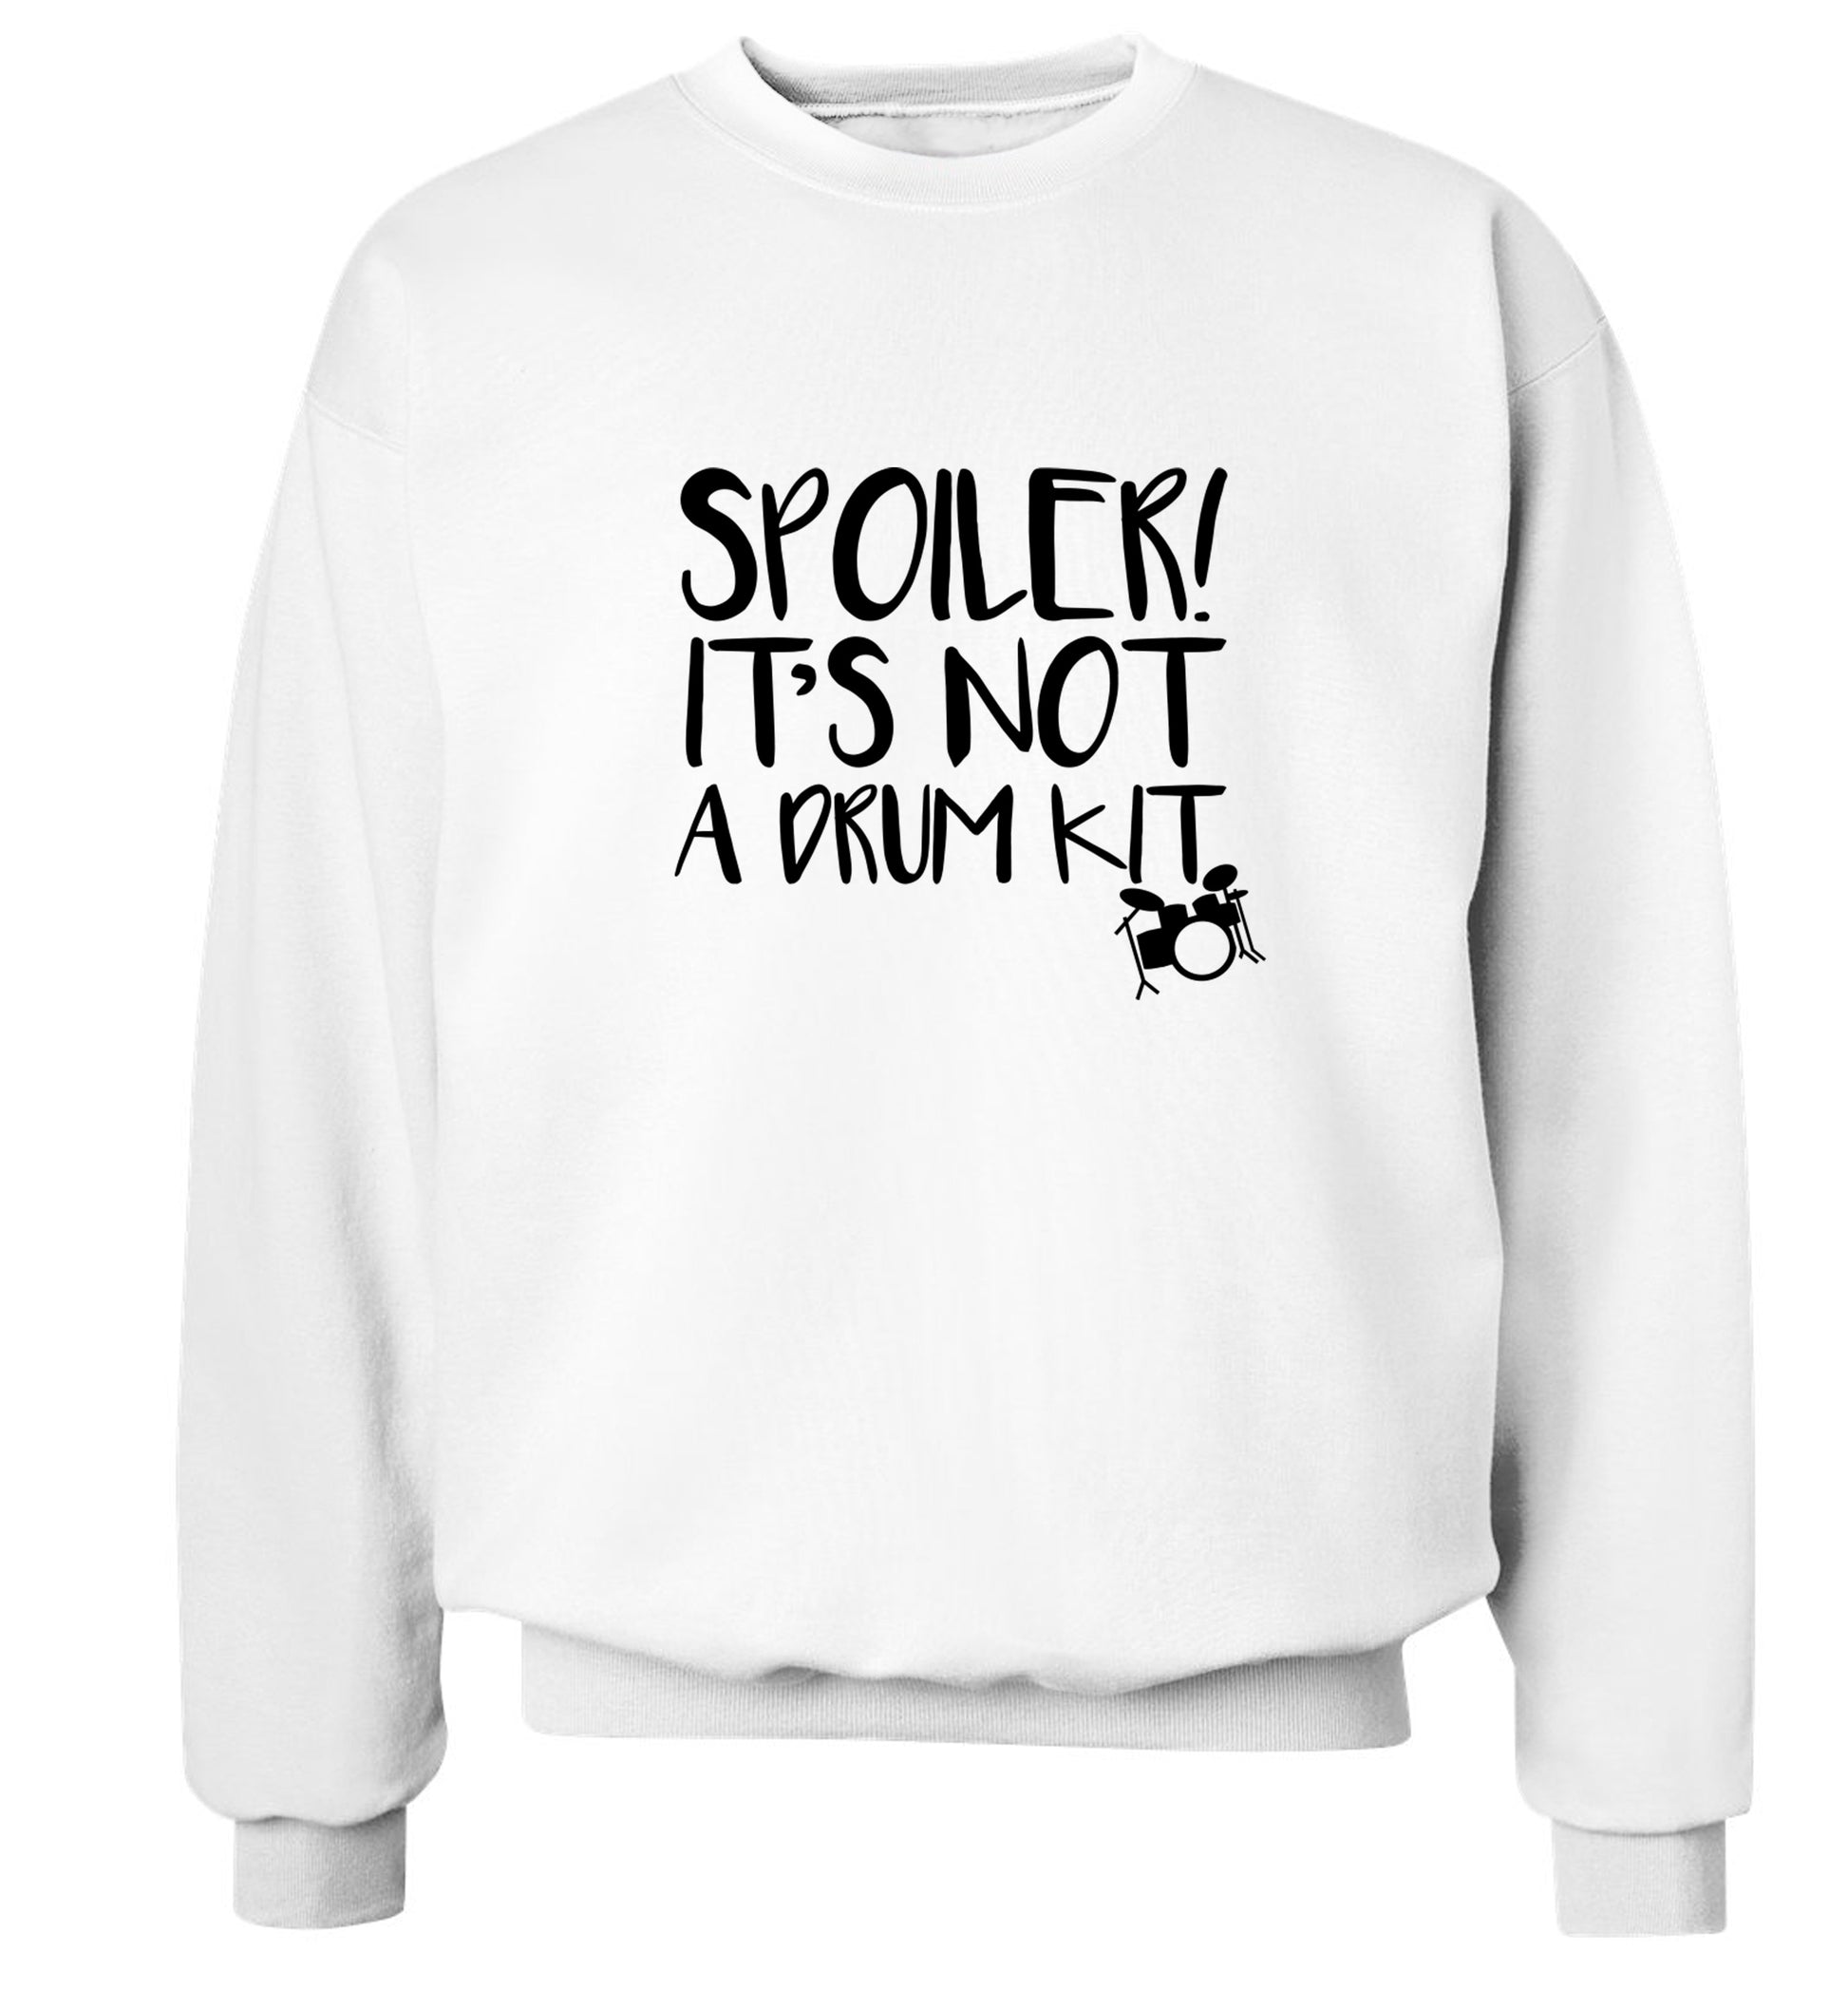 Spoiler it's not a drum kit Adult's unisex white Sweater 2XL